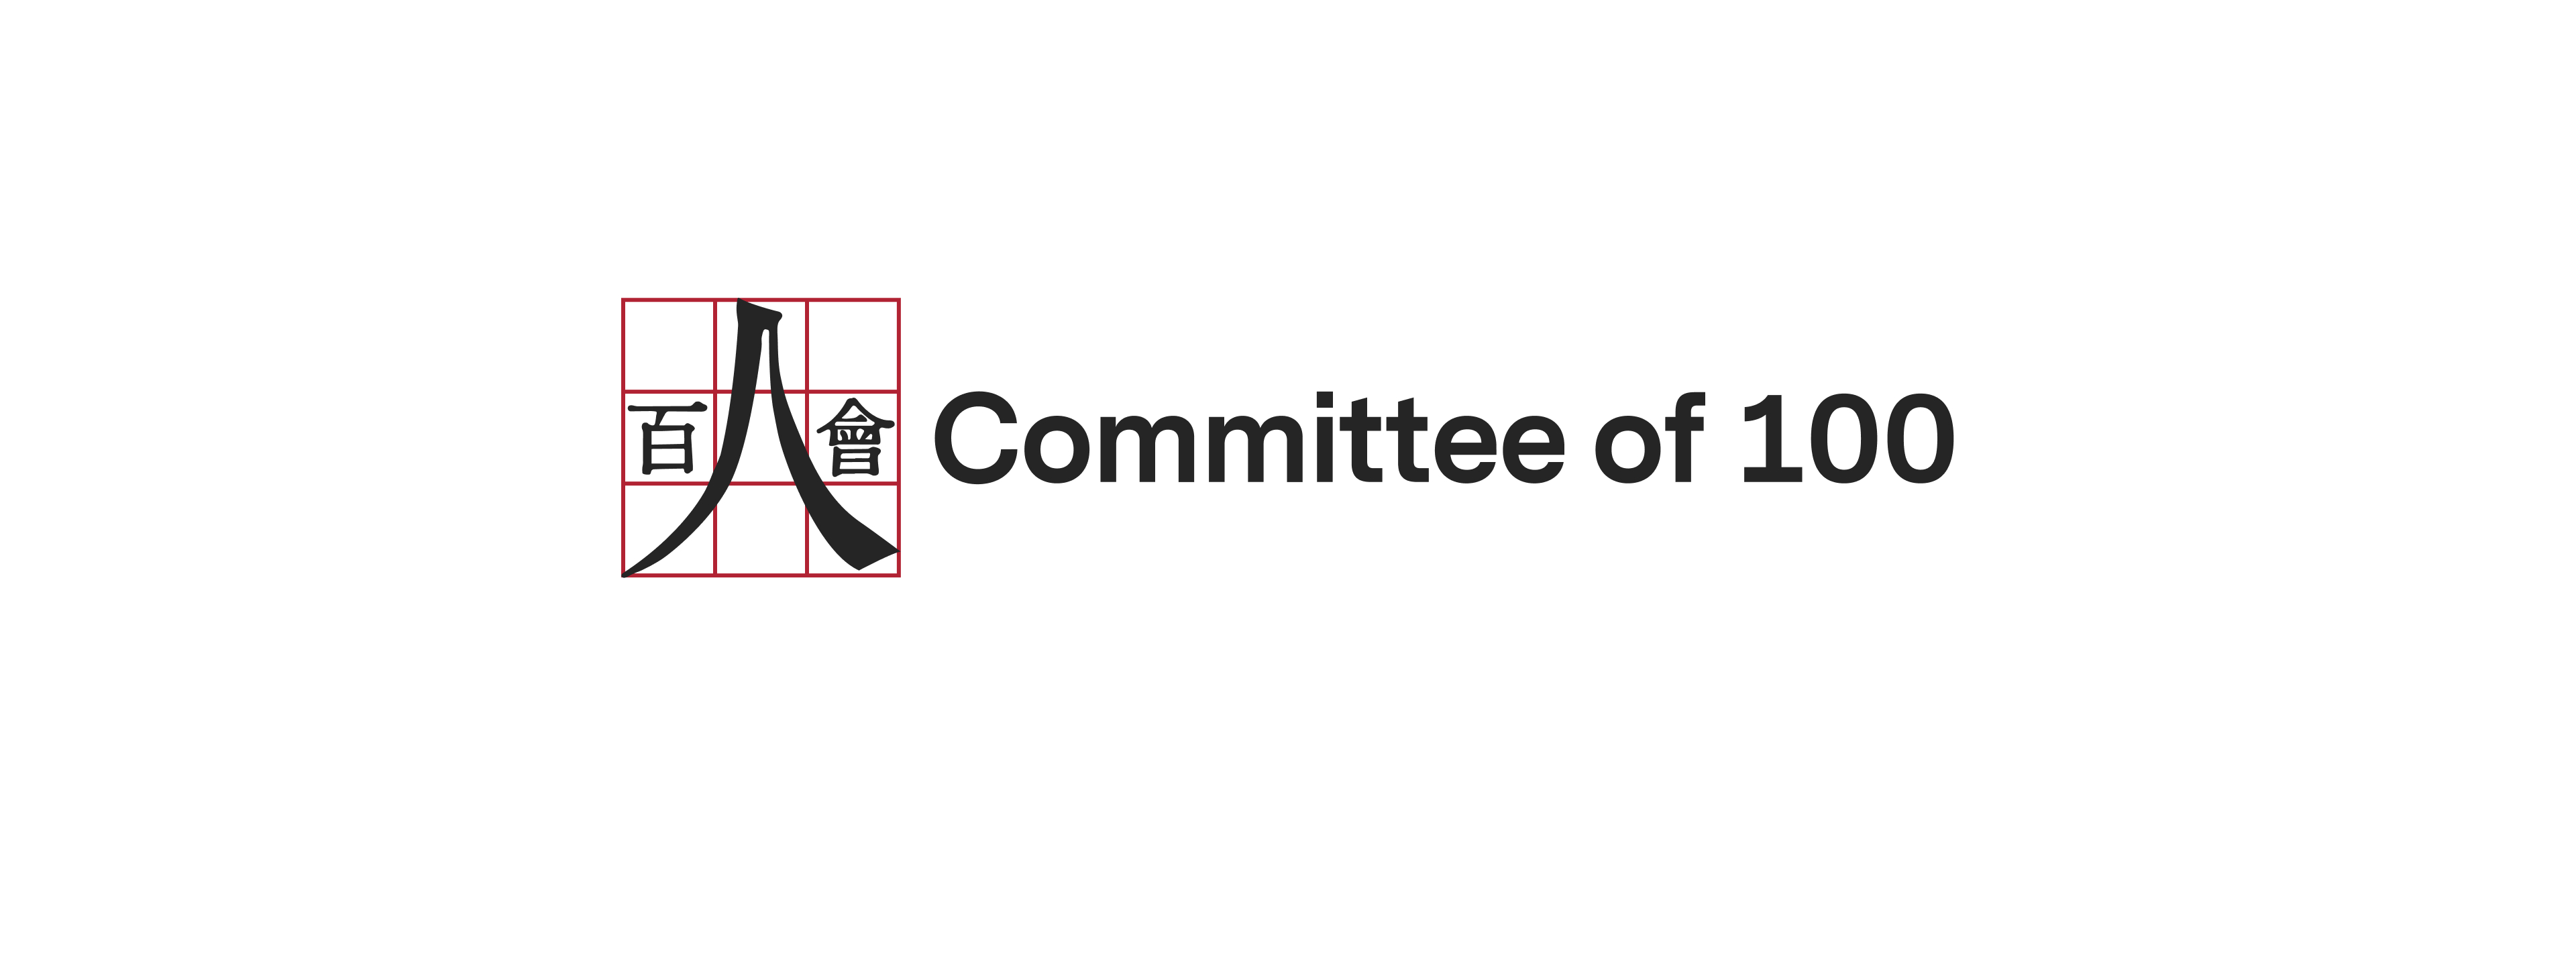 The Committee of 100 Opposes SCA-5, Calls for Constructive Dialogue